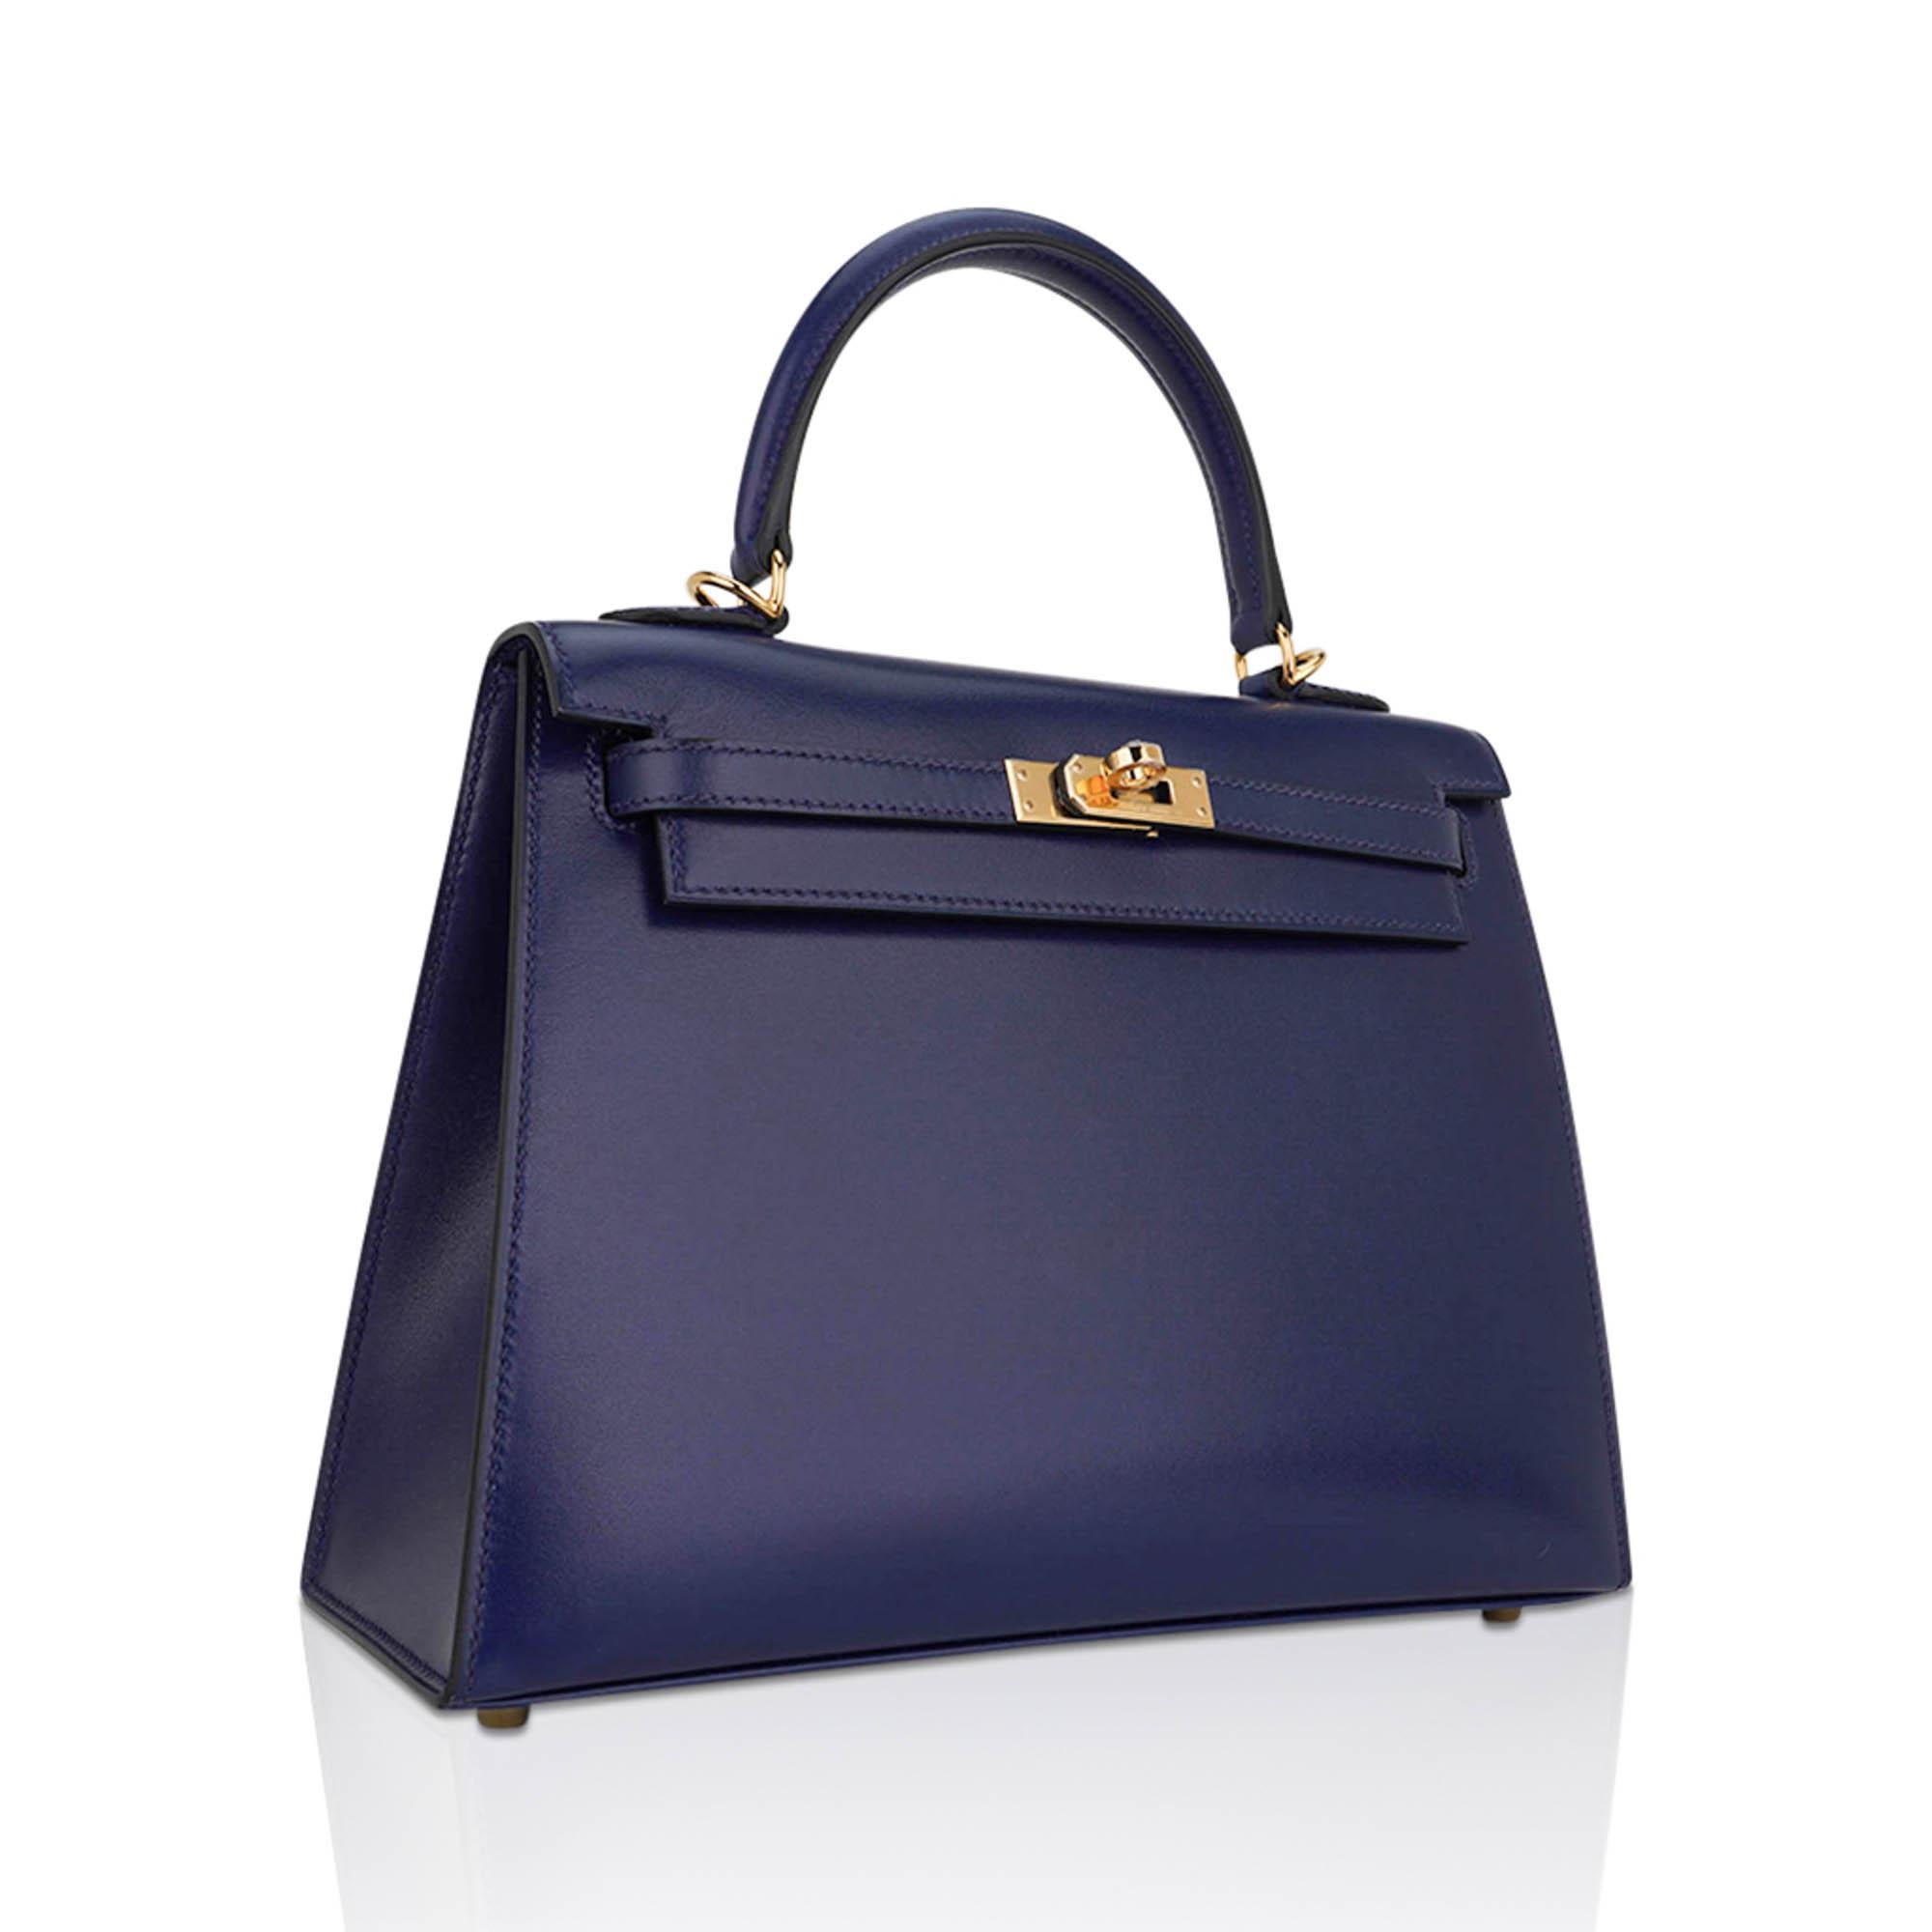 Mightychic offers an Hermes Kelly Sellier 25 bag featured in jewel tone Blue Sapphire Box leather.
Considered to be of the most collectible heritage leathers from Hermes, this timeless beauty exudes chic style.
Bleu Saphir is saturated and can range